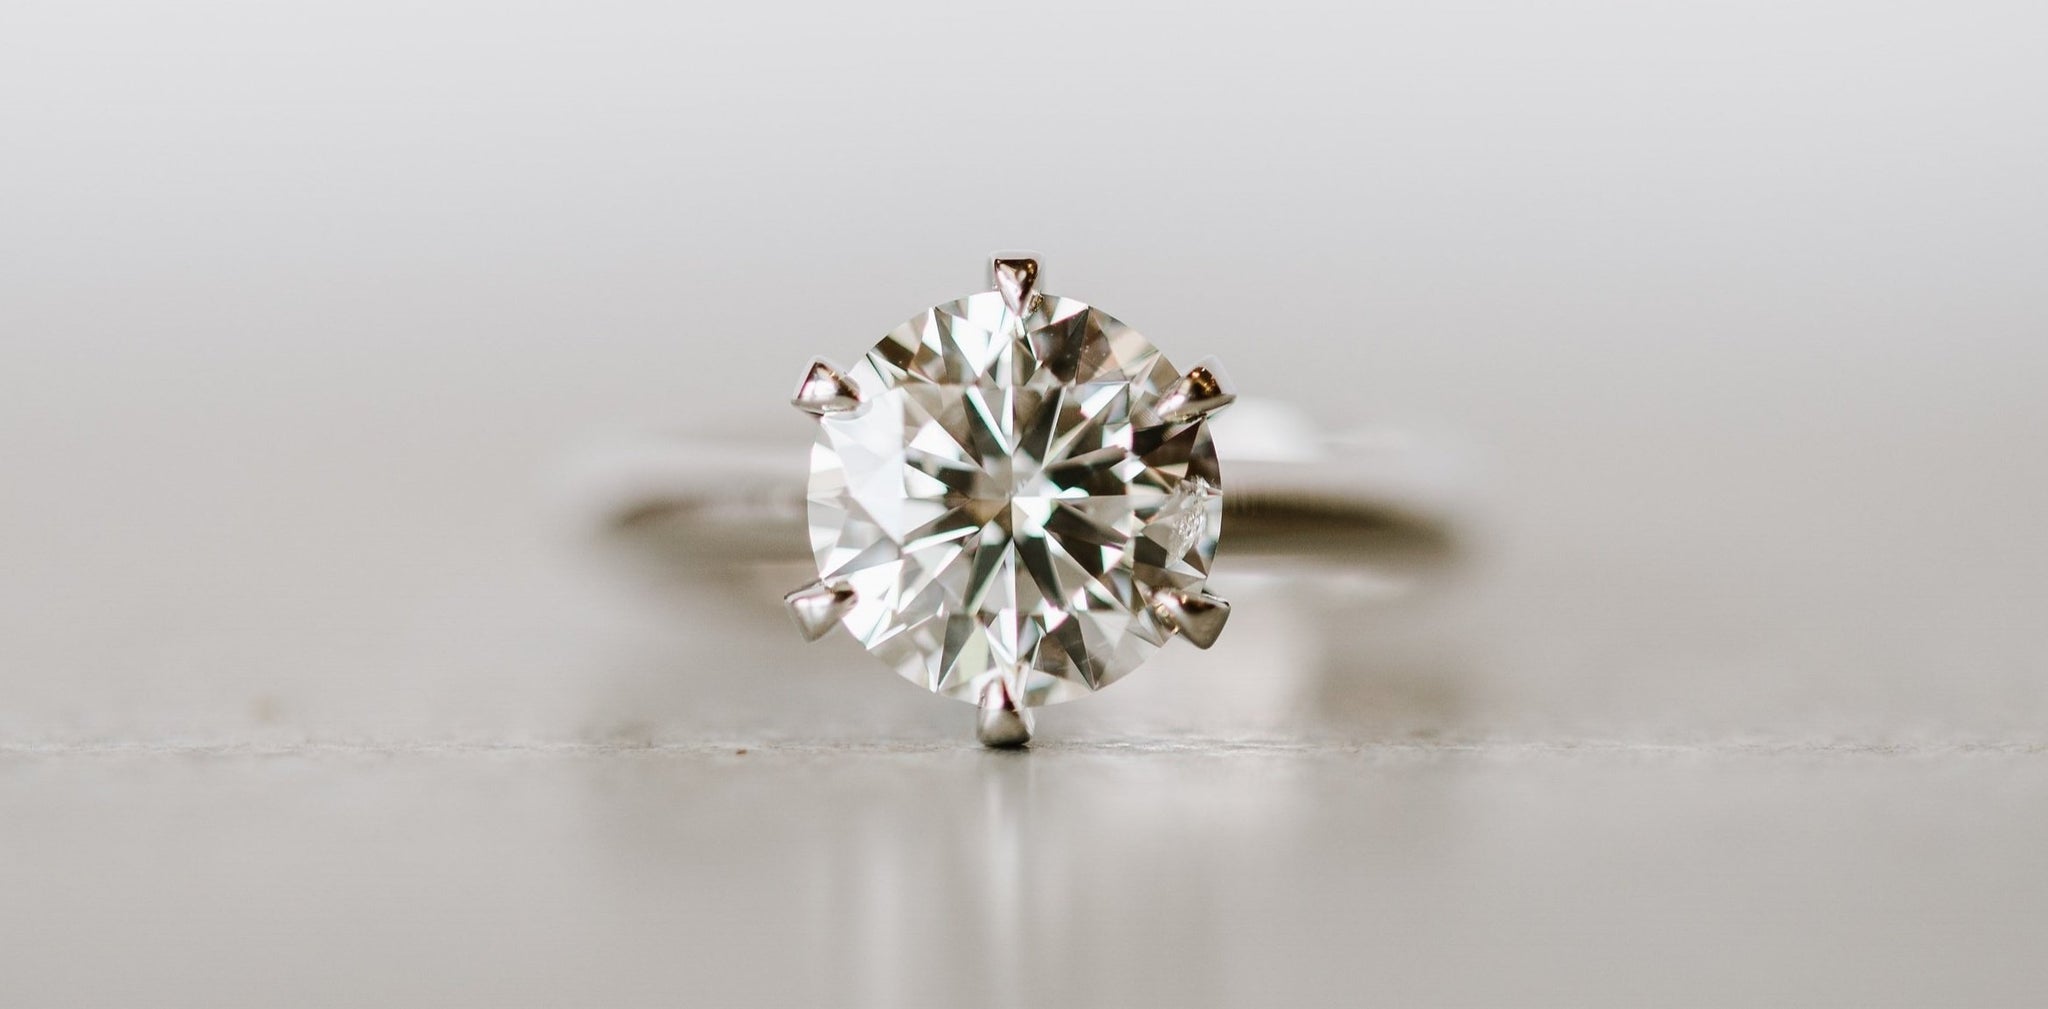 How Much Does A 2 Carat Ring Cost?